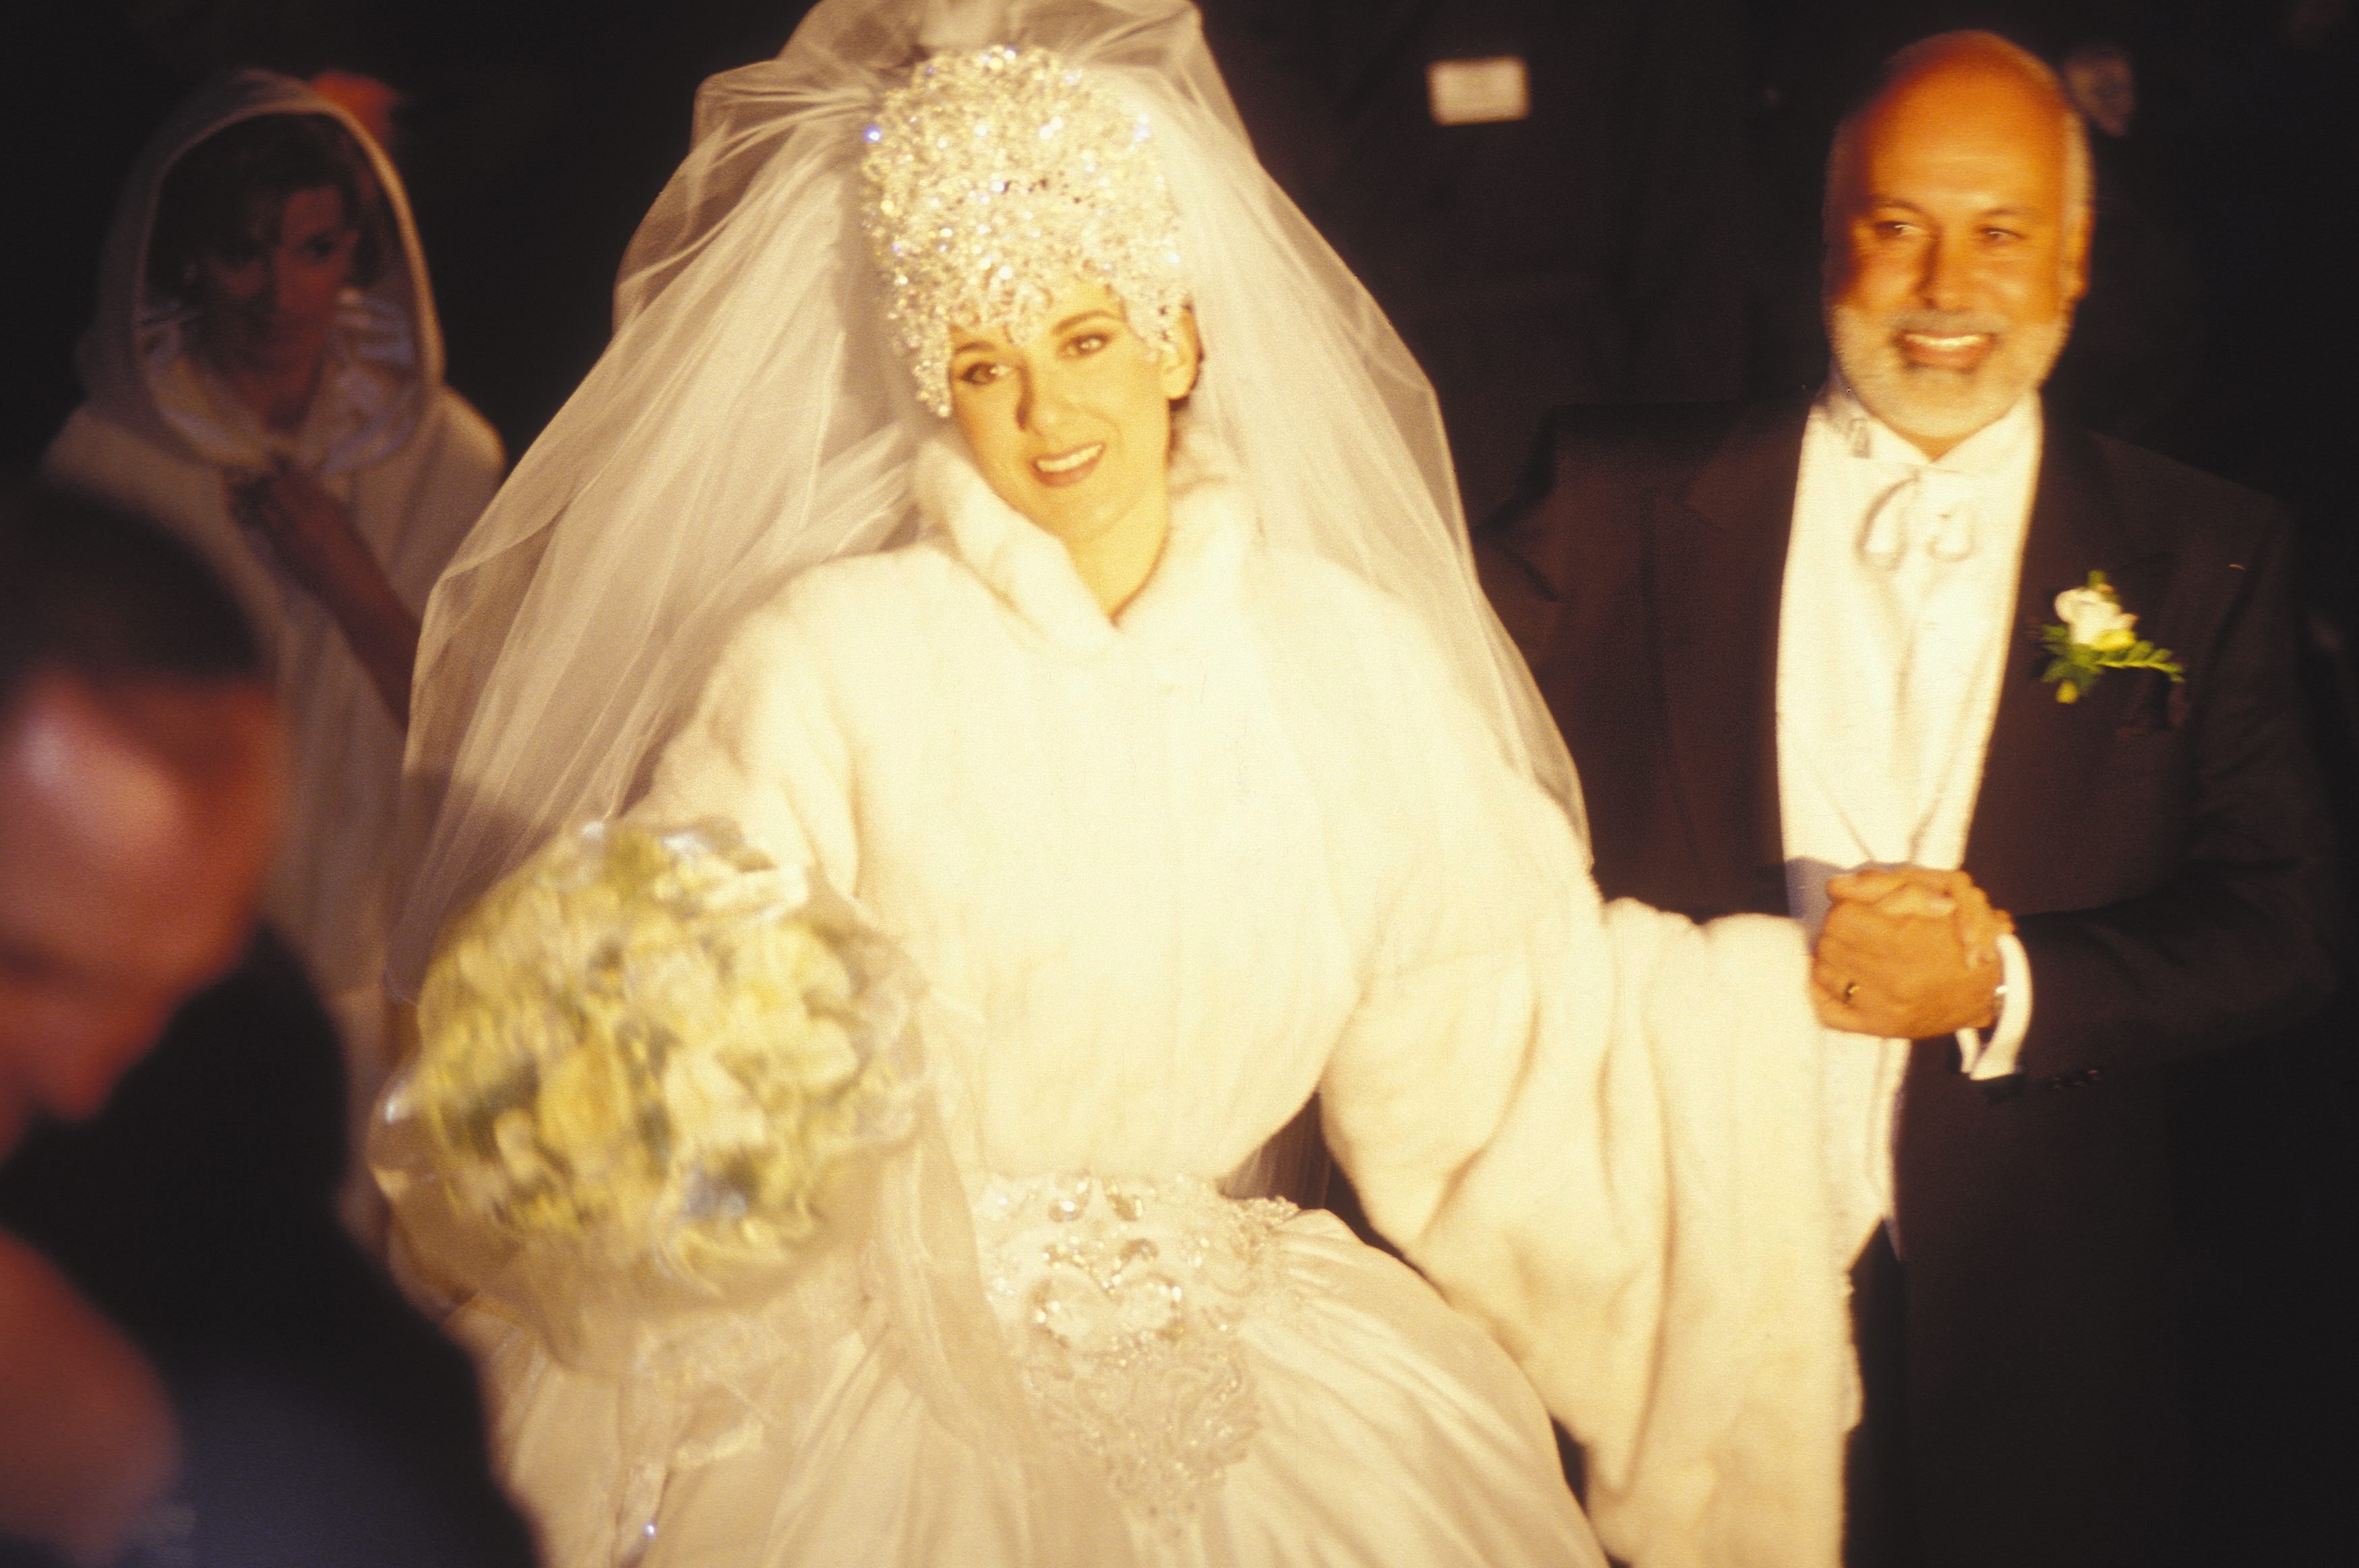 Celine Dion with husband Rene Angelil on their wedding day on December 15, 1994 in Montreal, Canada. / Source: Getty Images